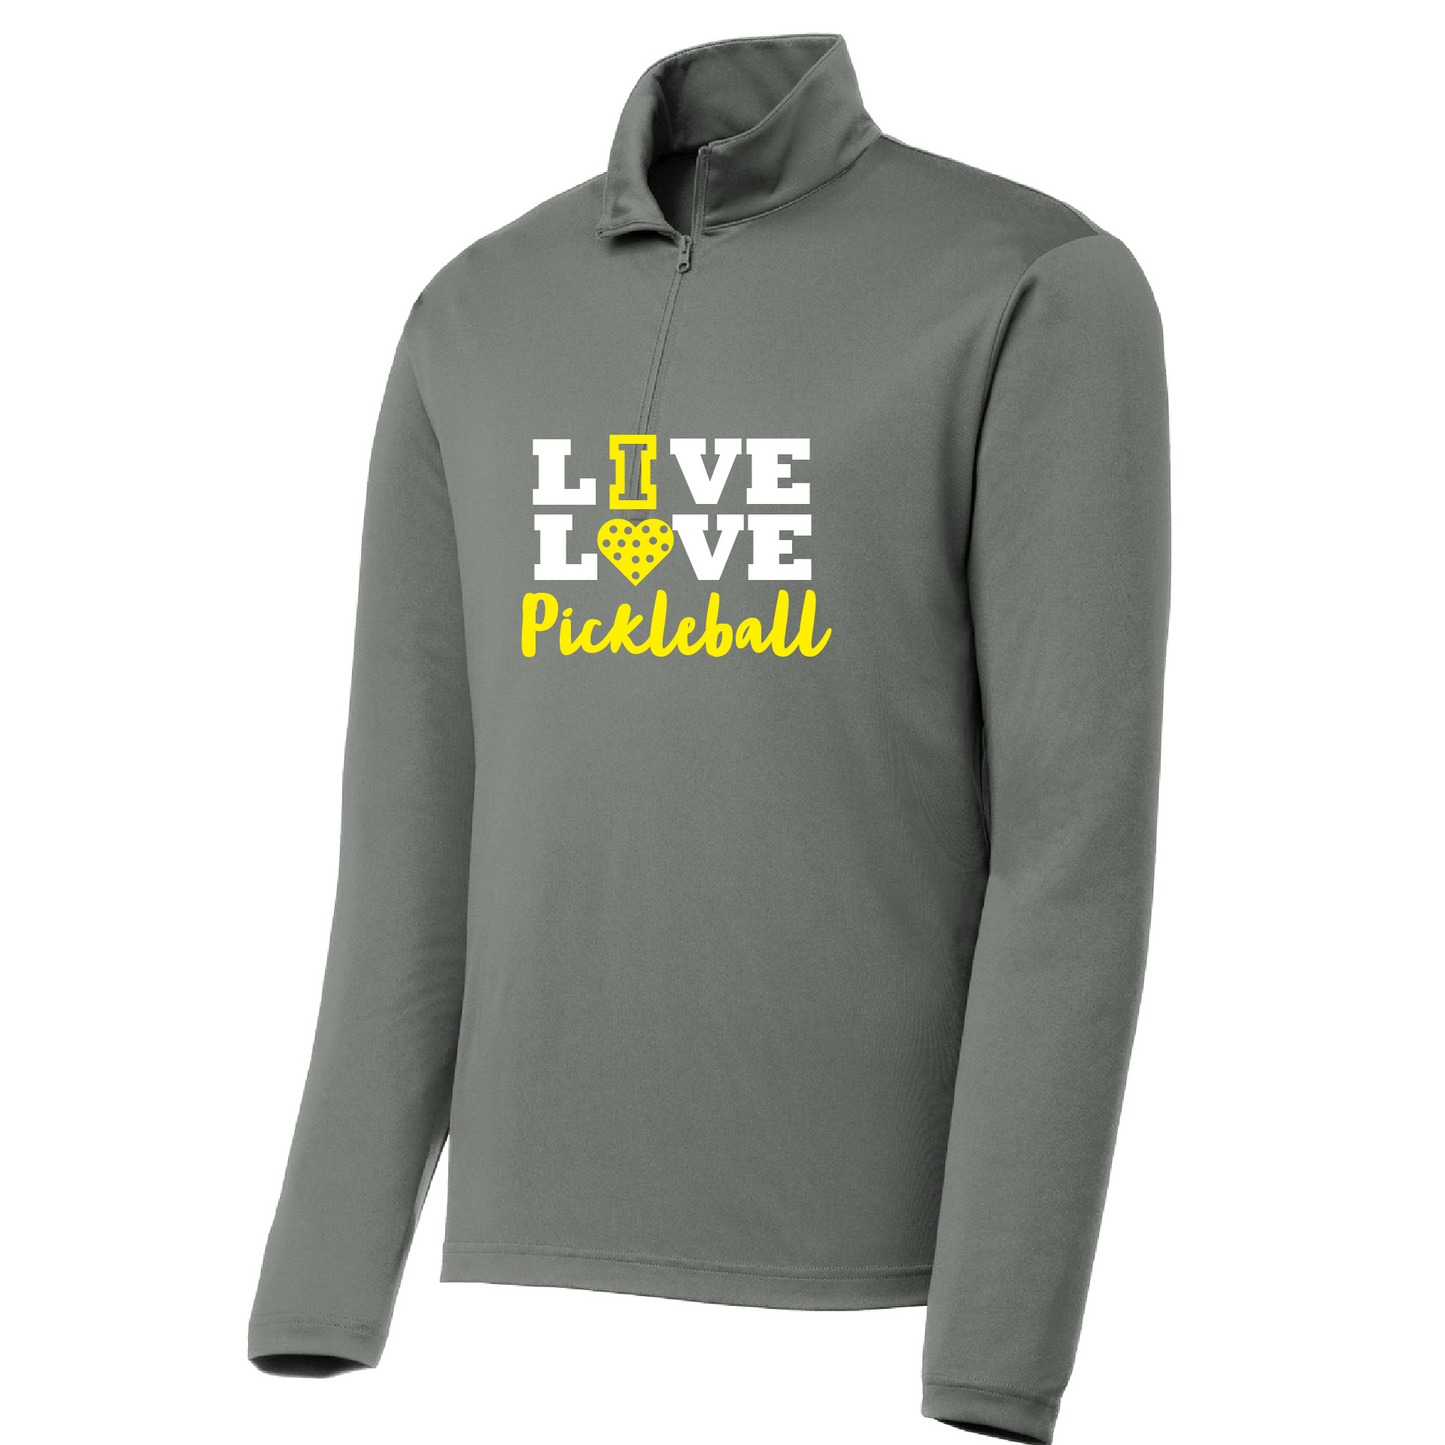 Pickleball Design: Live Love Pickleball  Men's 1/4-Zip Pullover  Turn up the volume in this Men's shirt with its perfect mix of softness and attitude. Material is ultra-comfortable with moisture wicking properties and tri-blend softness. PosiCharge technology locks in color. Highly breathable and lightweight. Versatile enough for wearing year-round.